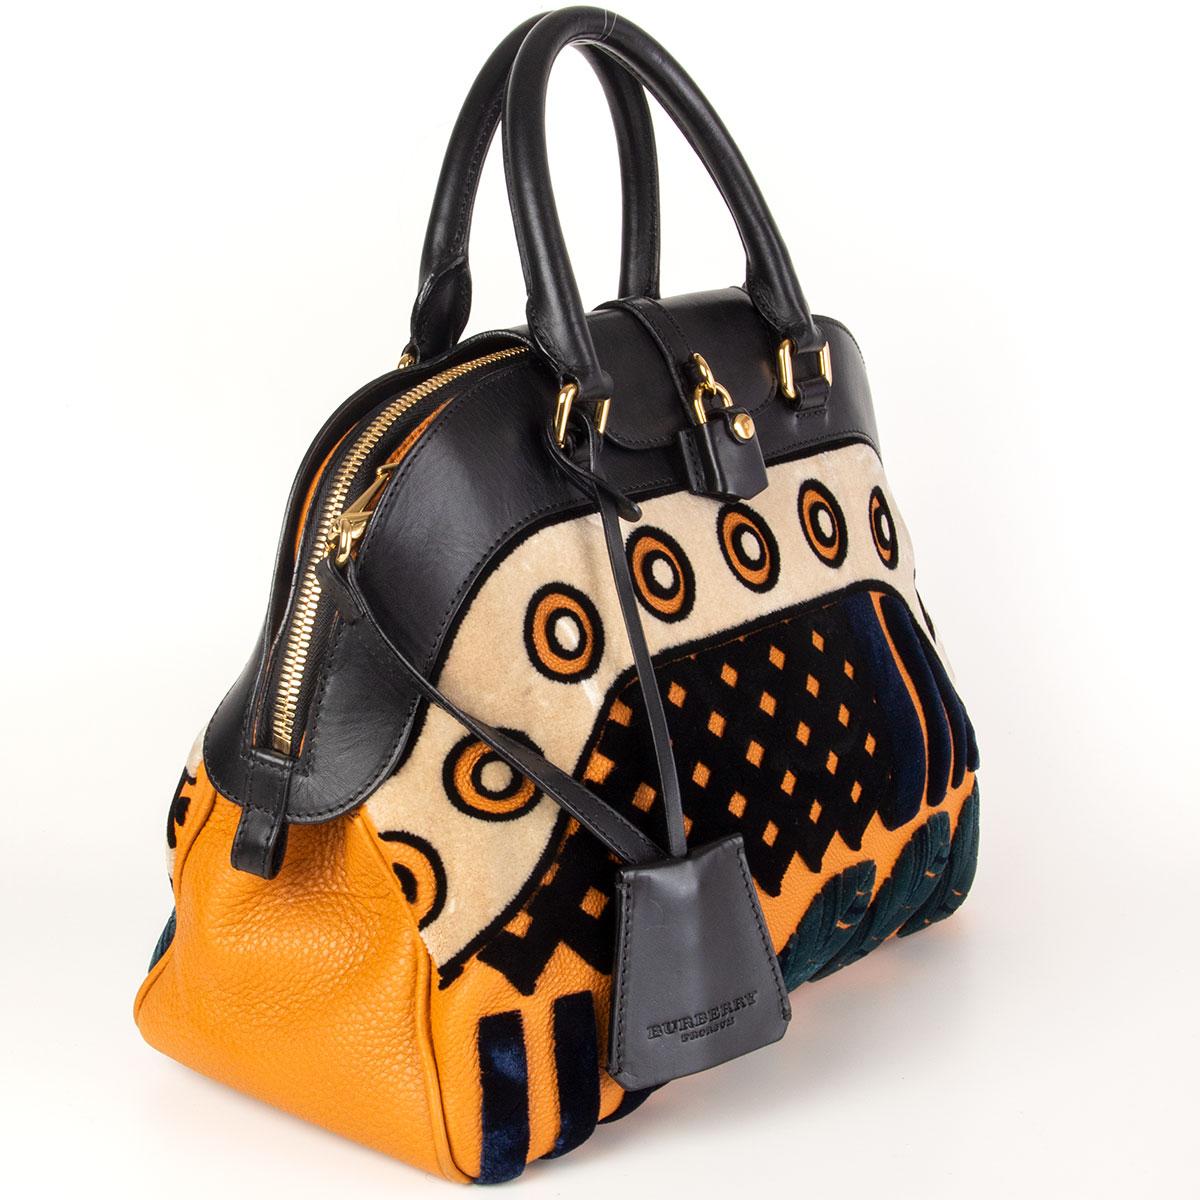 Burberry Prorsum 'Milverton Medium' bowling shoulder bag in black and orange calfskin and midnight blue, black, sand and petrol velvet. Opens with a zipper on top and is lined in black nylon with one zipper pocket against the back and two open